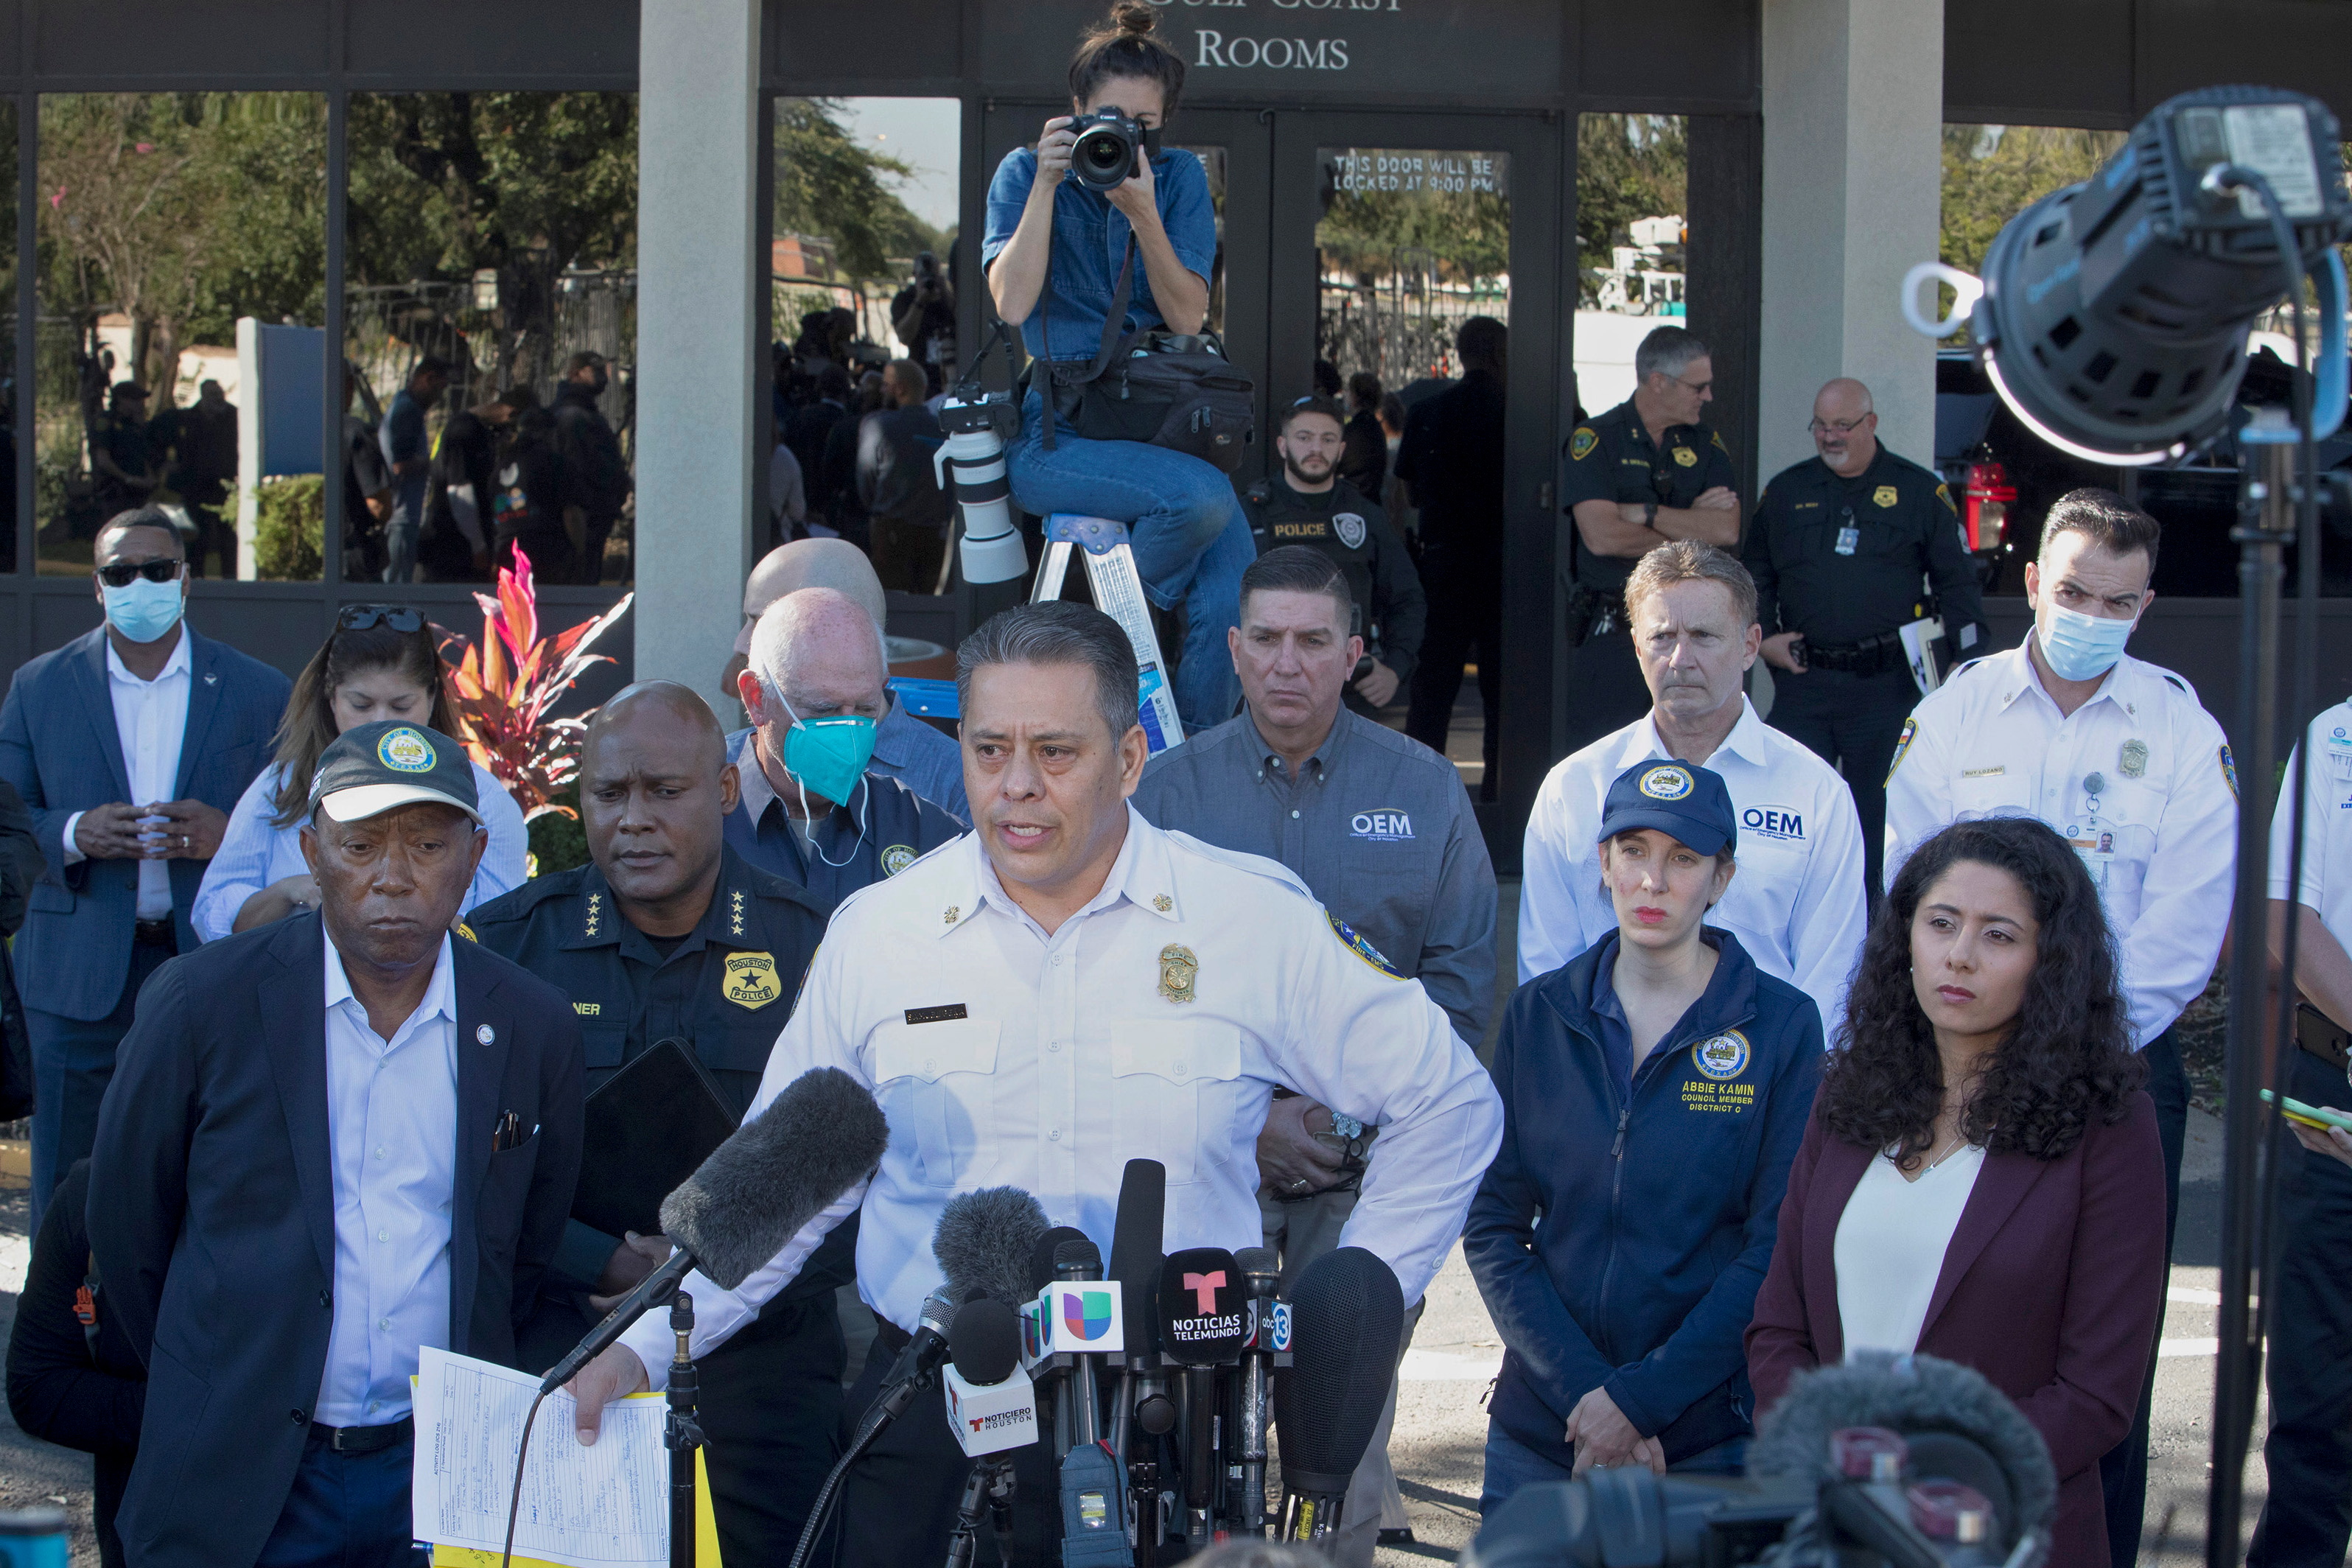 Houston Fire Chief Samuel Pena addresses the news media, the day after a deadly crush of fans during a performance by rapper Travis Scott at the Astroworld Festival, in Houston, Texas, U.S. November 6, 2021.  REUTERS/Daniel Kramer